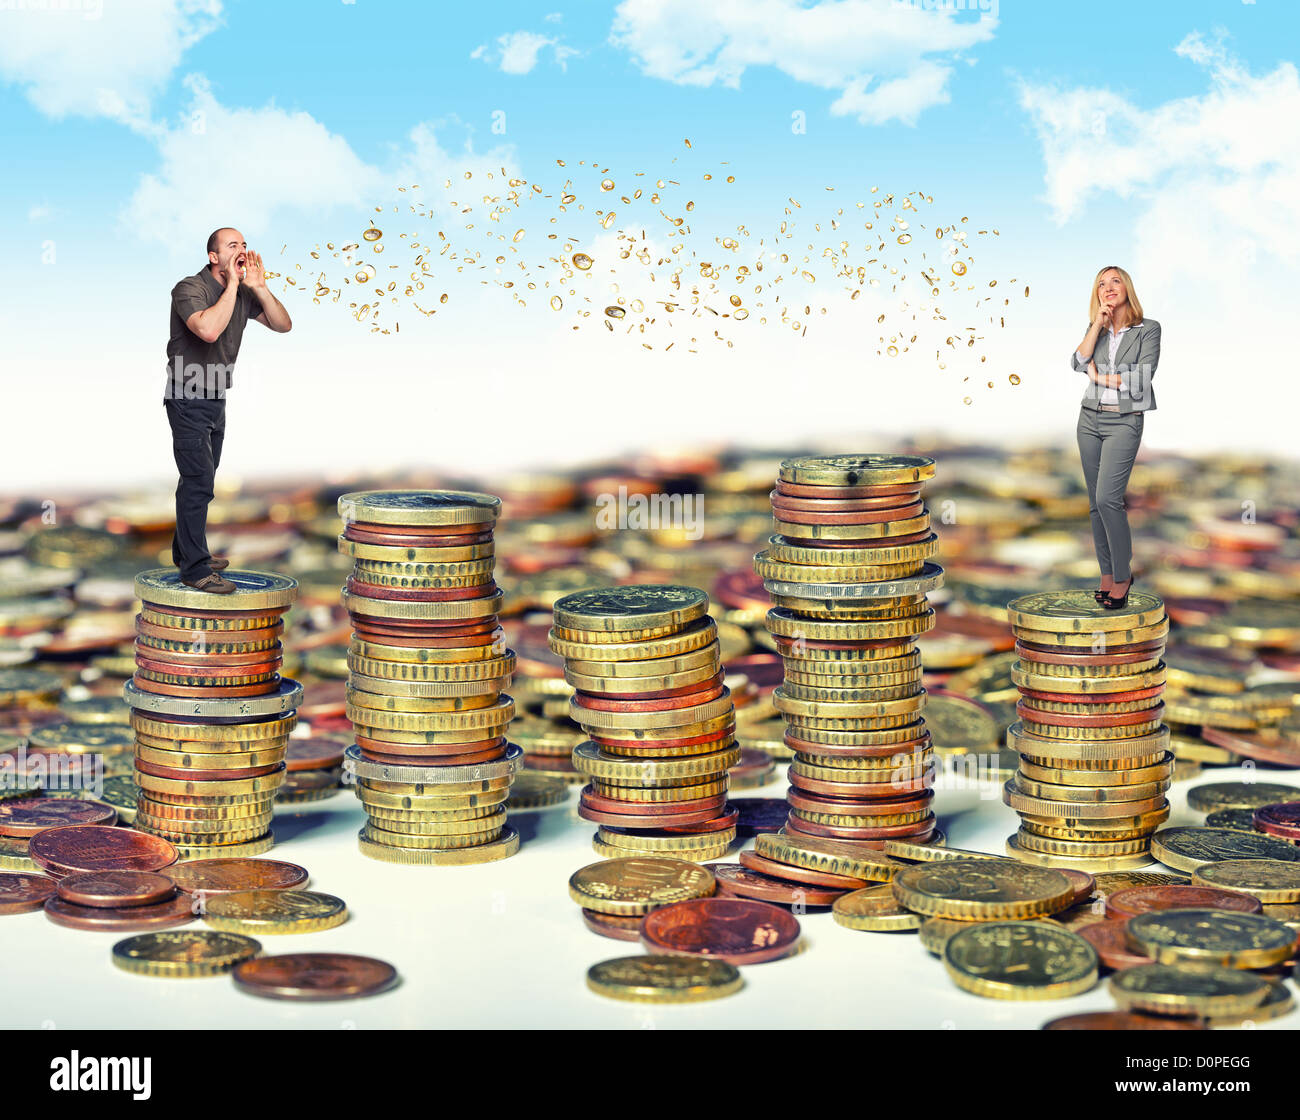 man and woman and money talk on coin piles Stock Photo